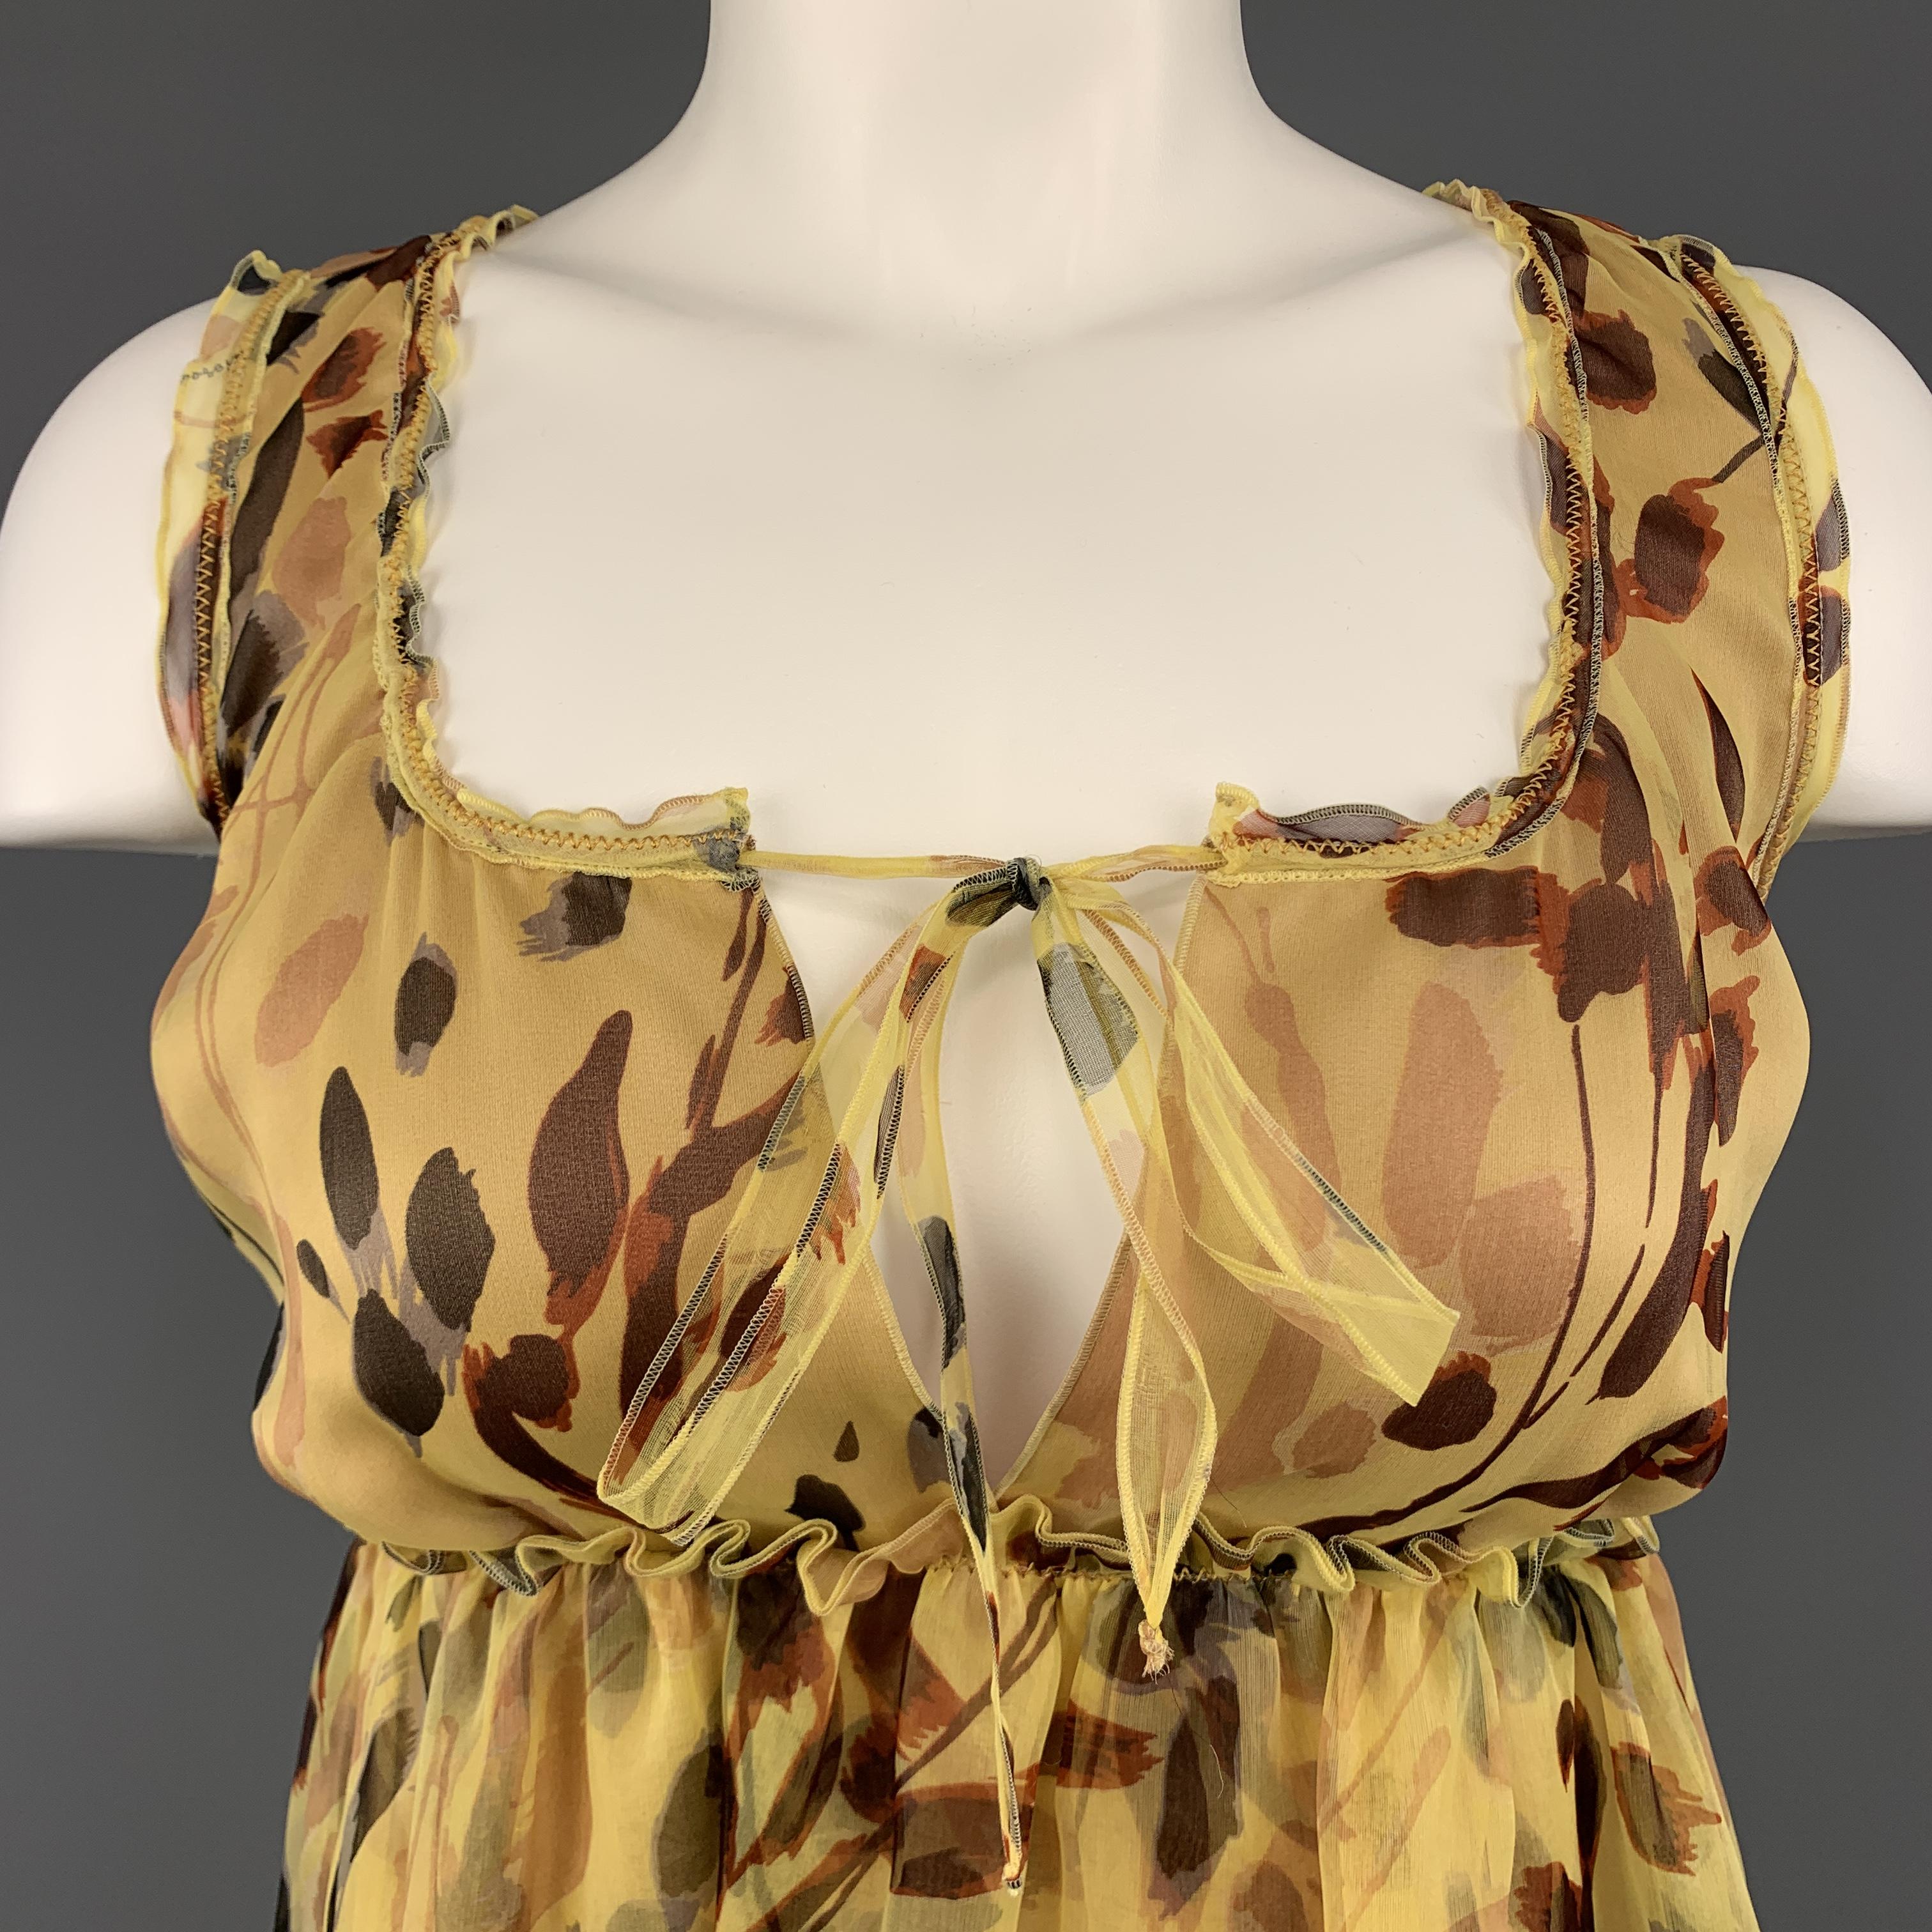 MISSONI camisole top comes in yellow leaves print silk with a tied scoop neck ands ruffled A line hem. Made in Italy.

Excellent Pre-Owned Condition.
Marked: IT 38

Measurements:

Shoulder: 12 in.
Bust: 32 in.
Length: 20.5 in.